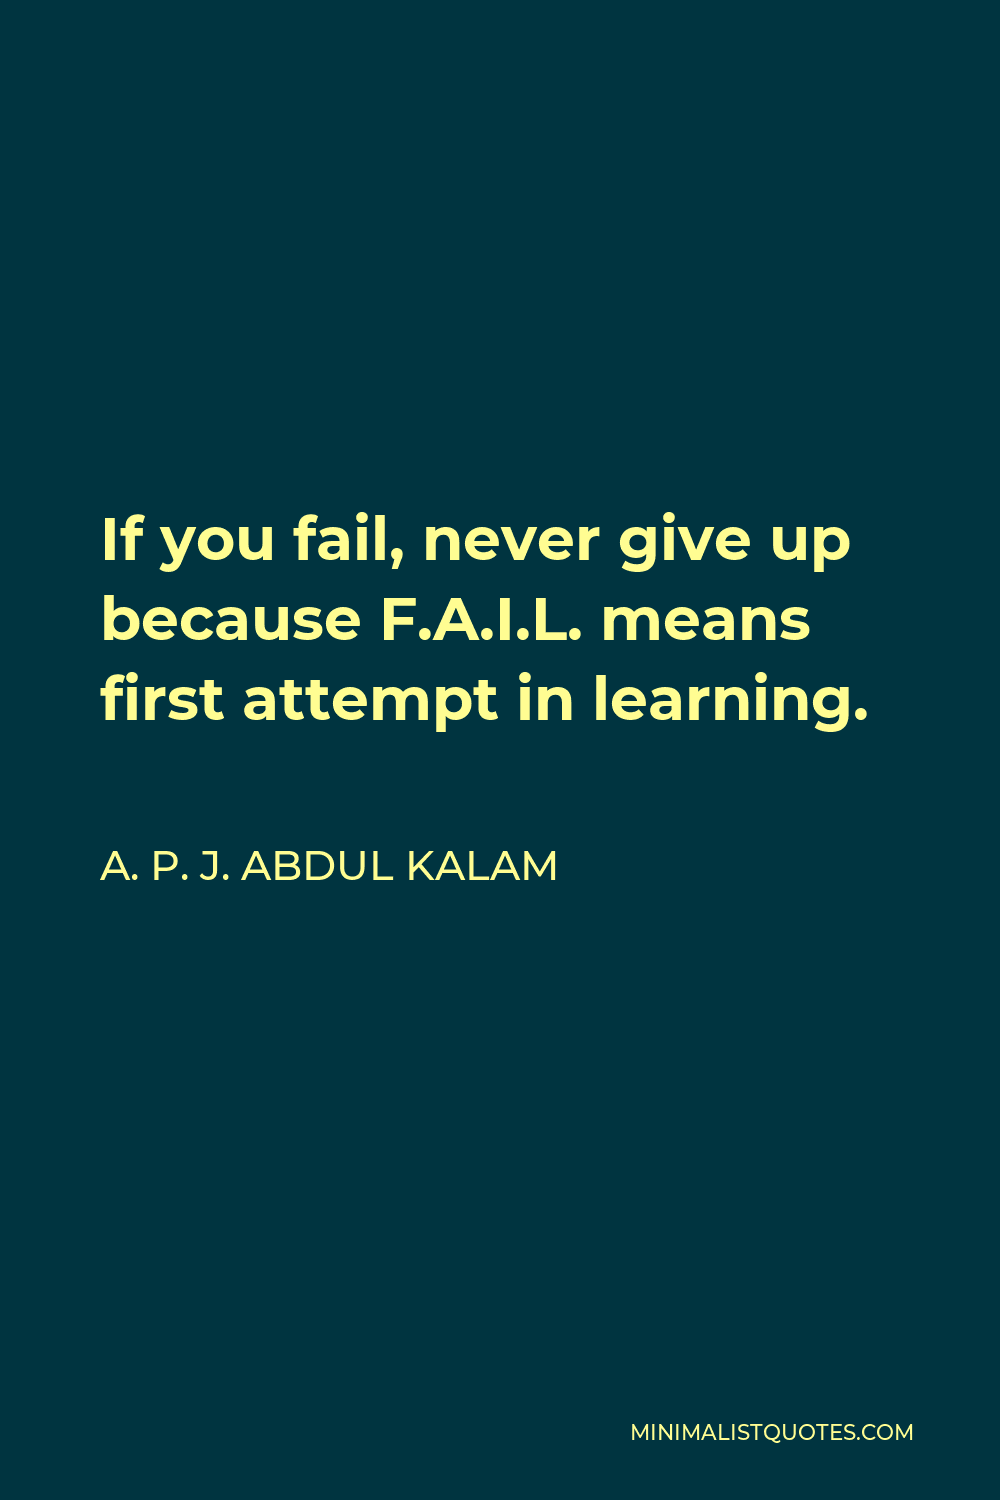 A. P. J. Abdul Kalam Quote - If you fail, never give up because F.A.I.L. means first attempt in learning.